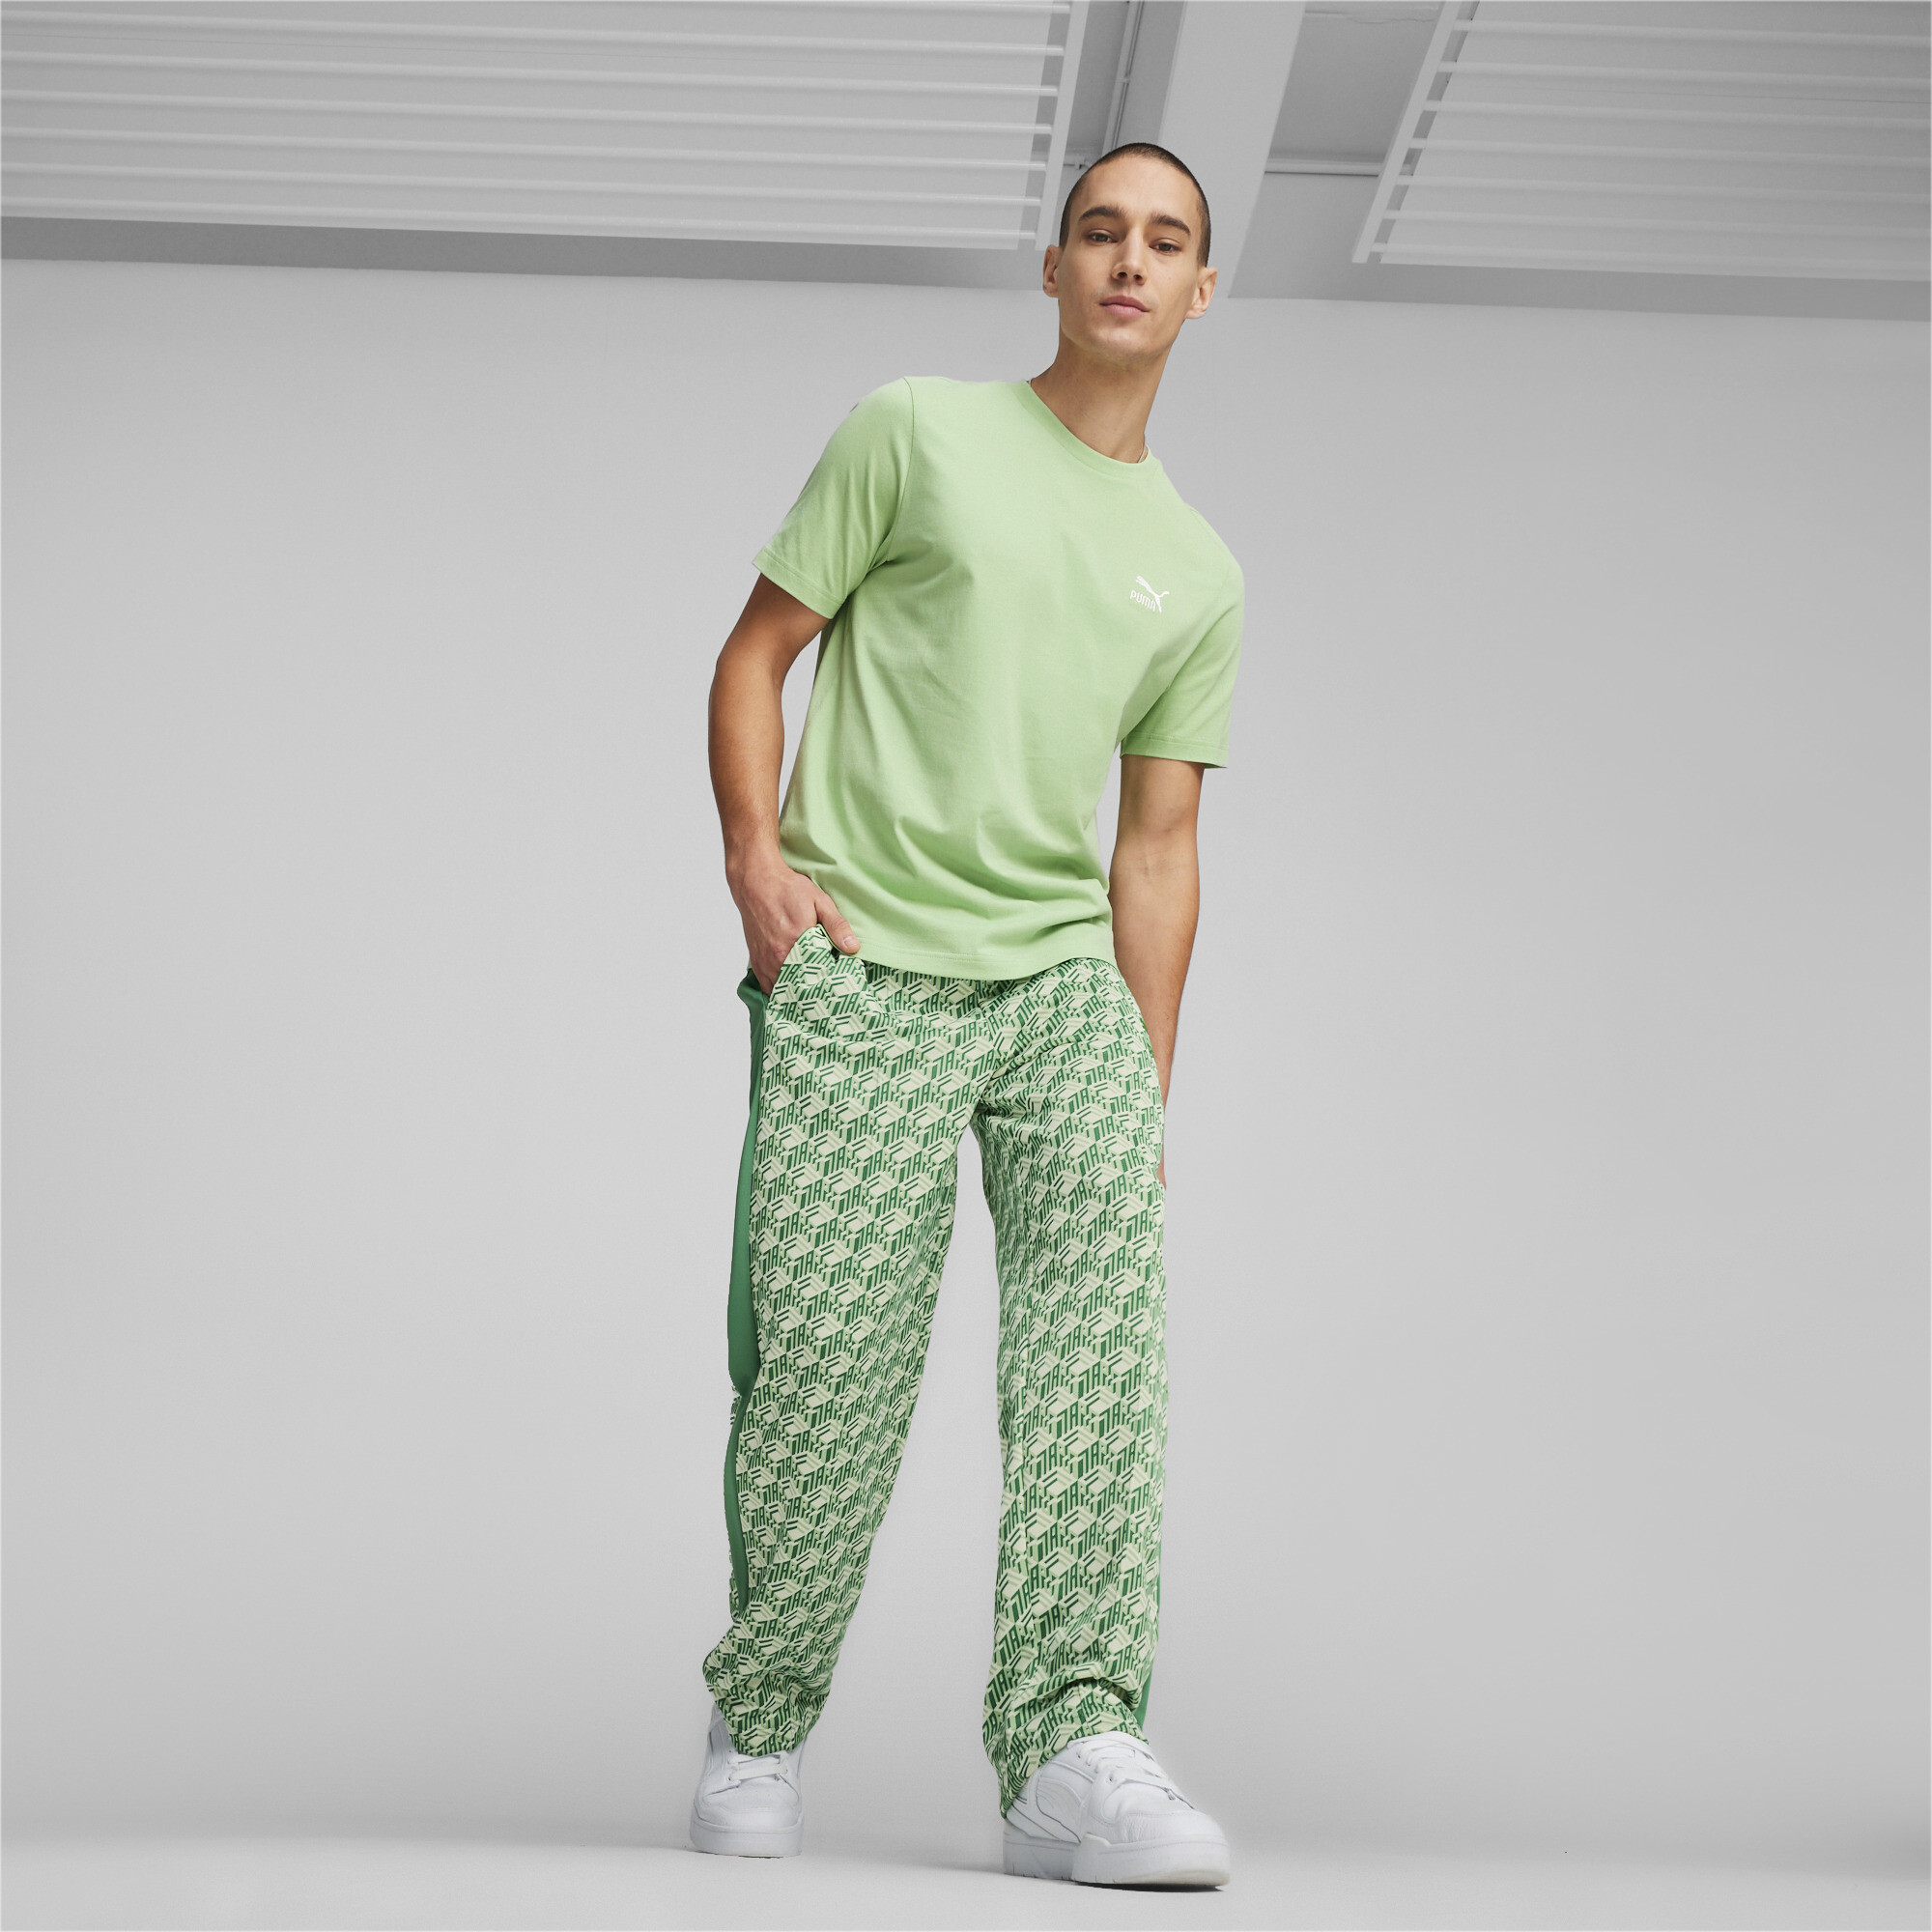 Men's Puma T7's Straight Track Pants, Green, Size S, Clothing